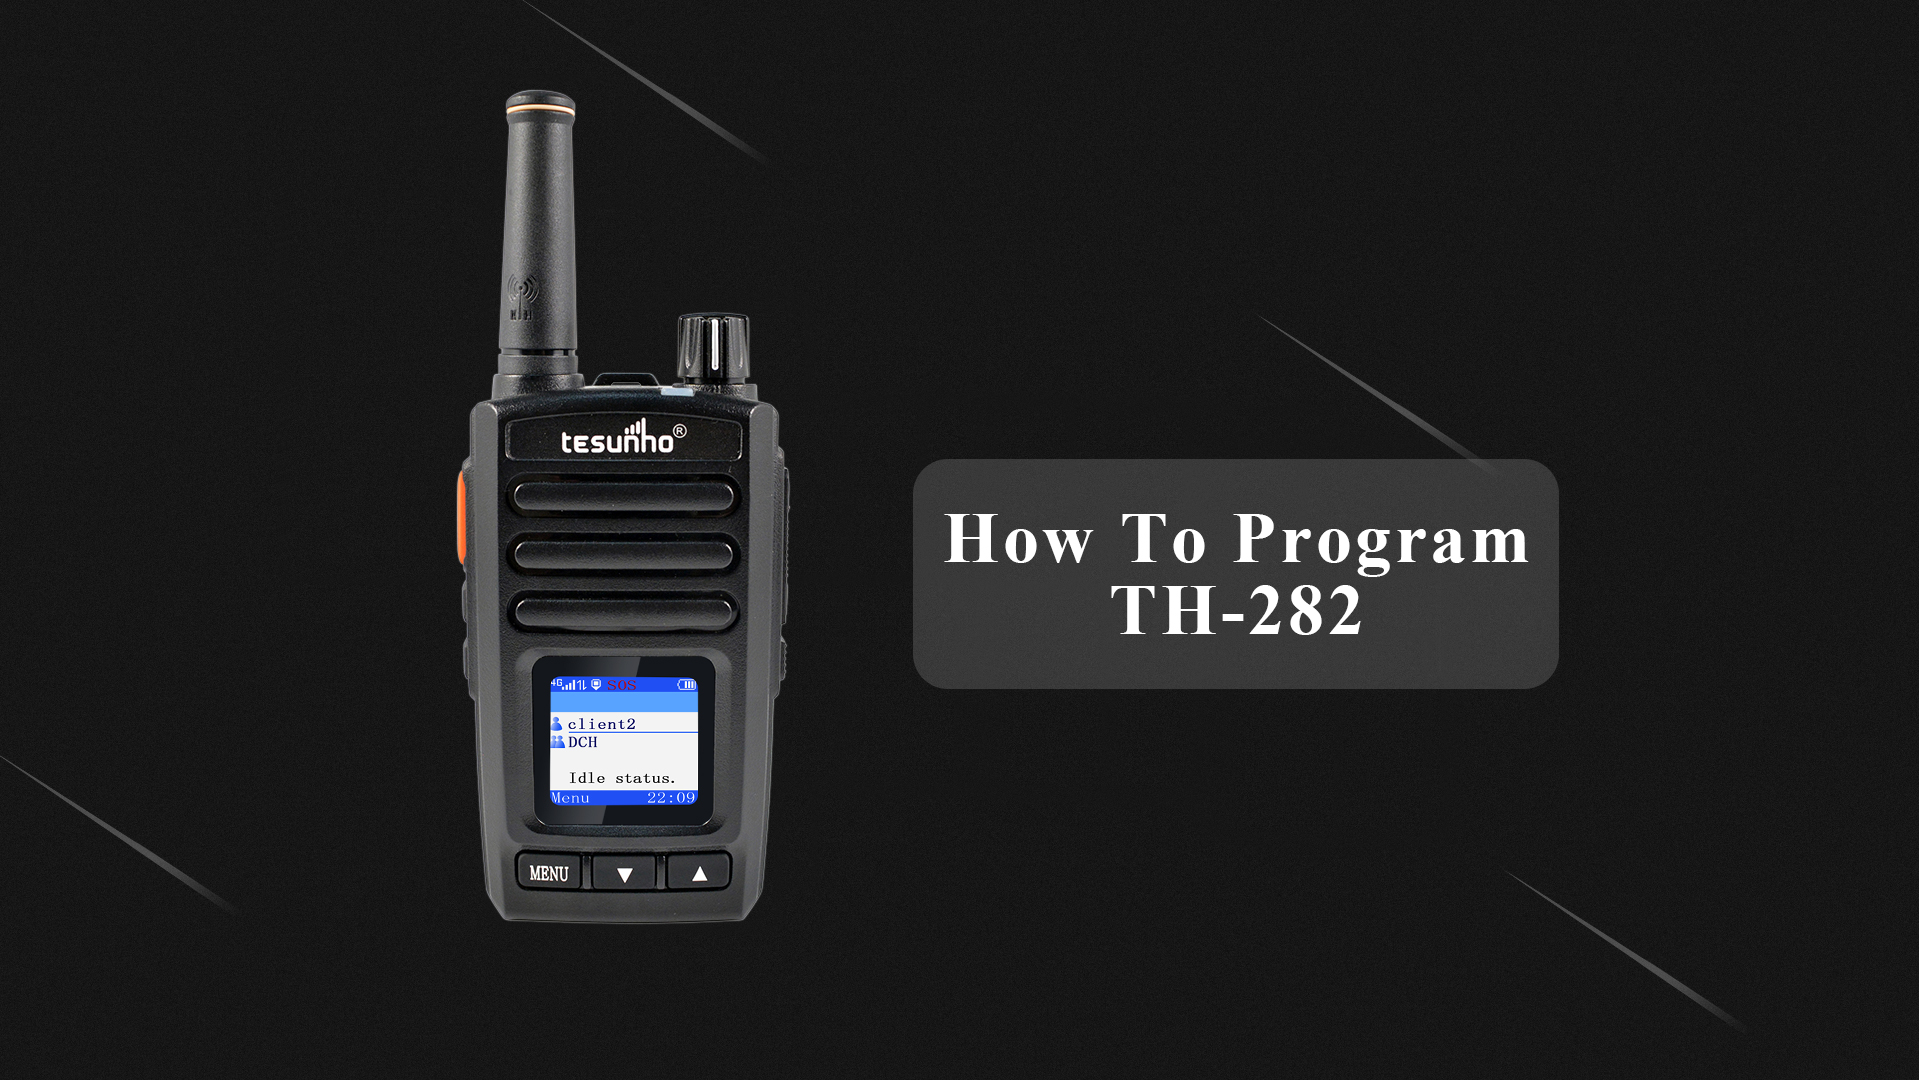 How To Program TH-282